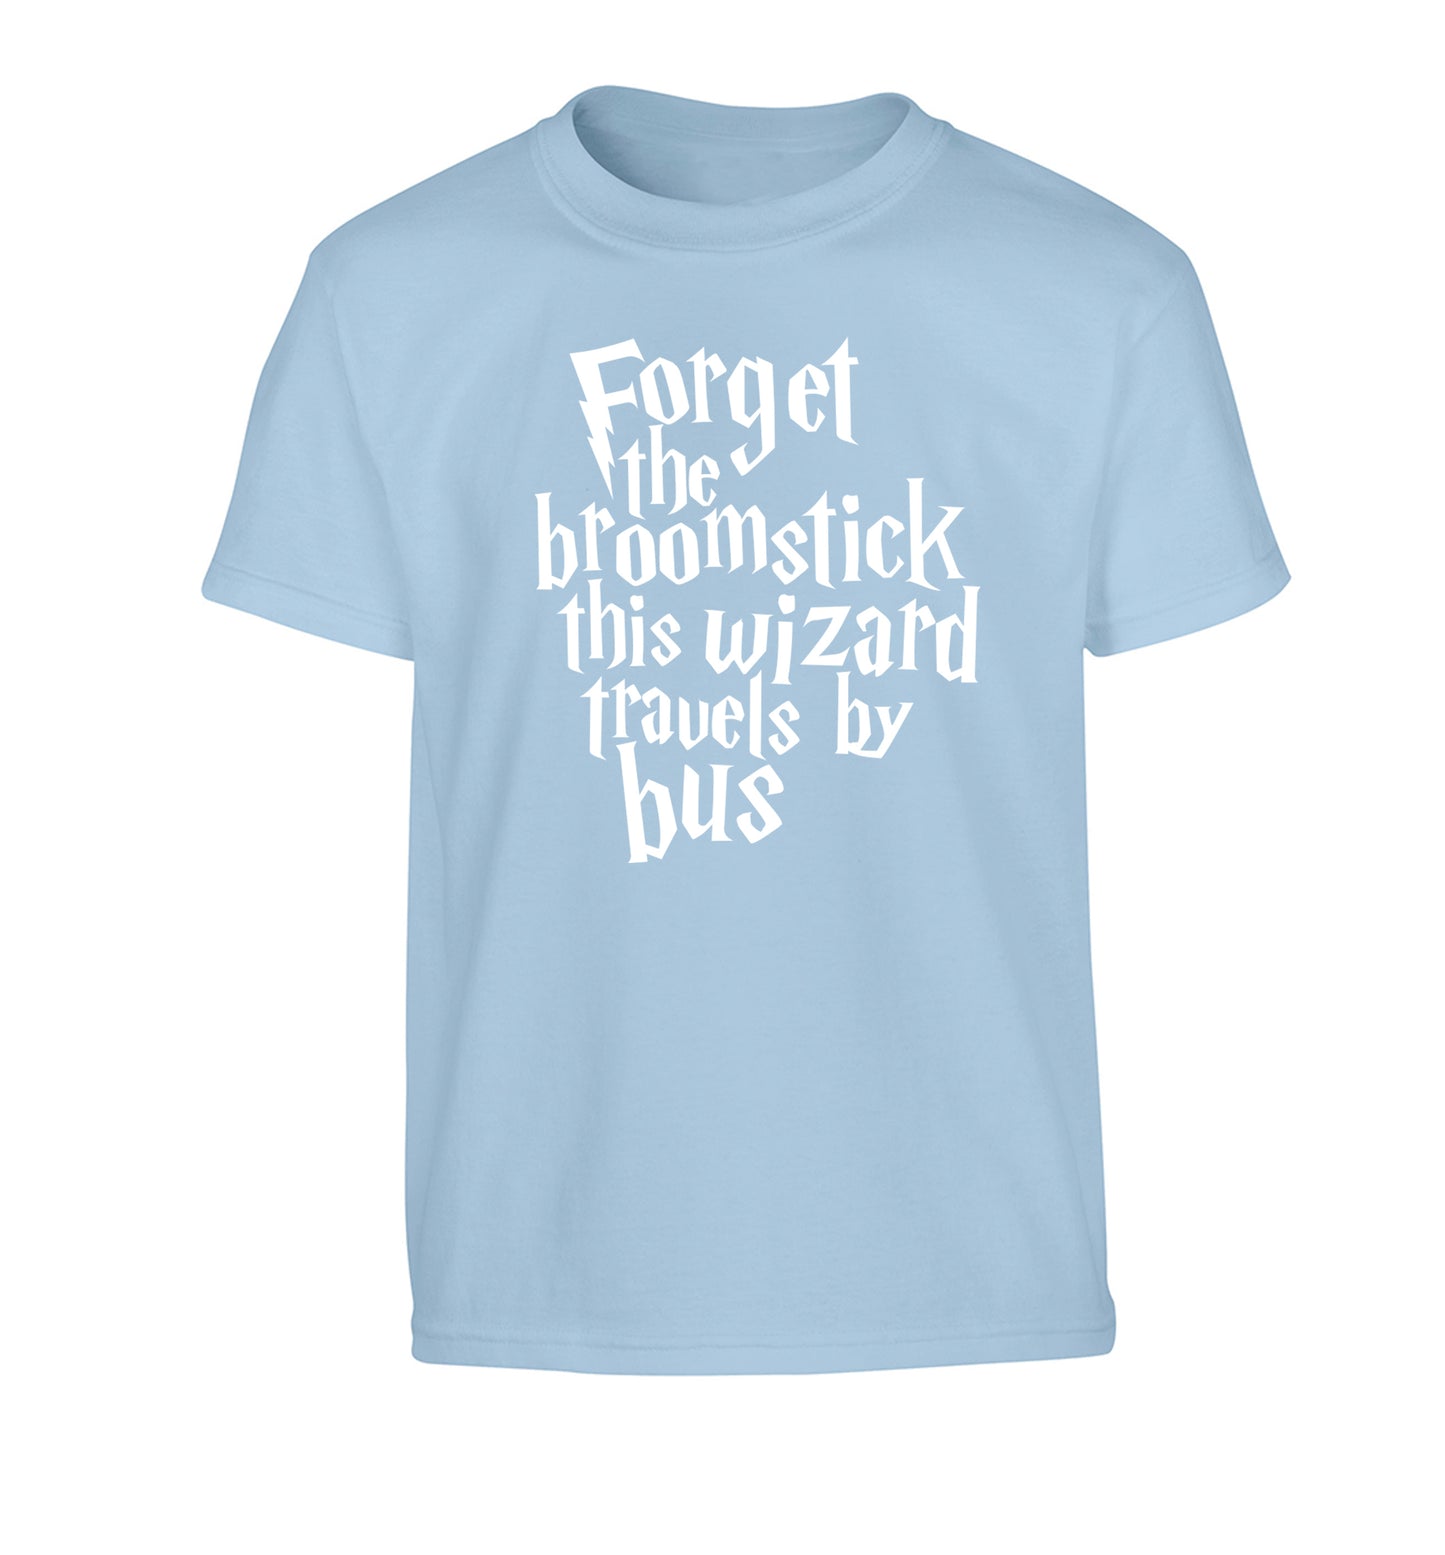 Forget the broomstick this wizard travels by bus Children's light blue Tshirt 12-14 Years